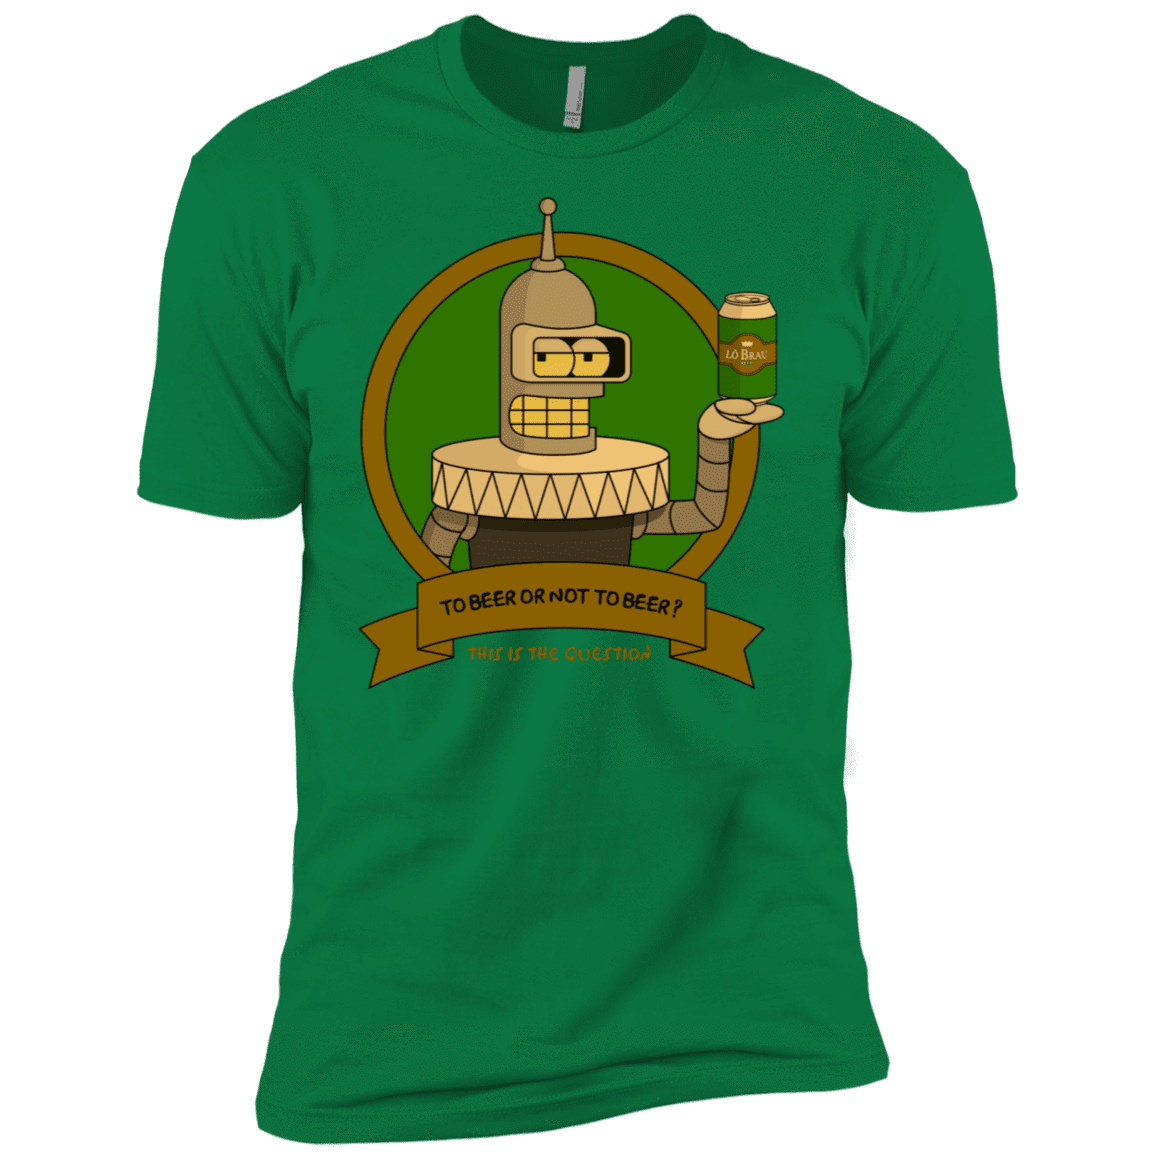 T-Shirts Kelly Green / X-Small To Beer or not to Beer Bender Edition Men's Premium T-Shirt